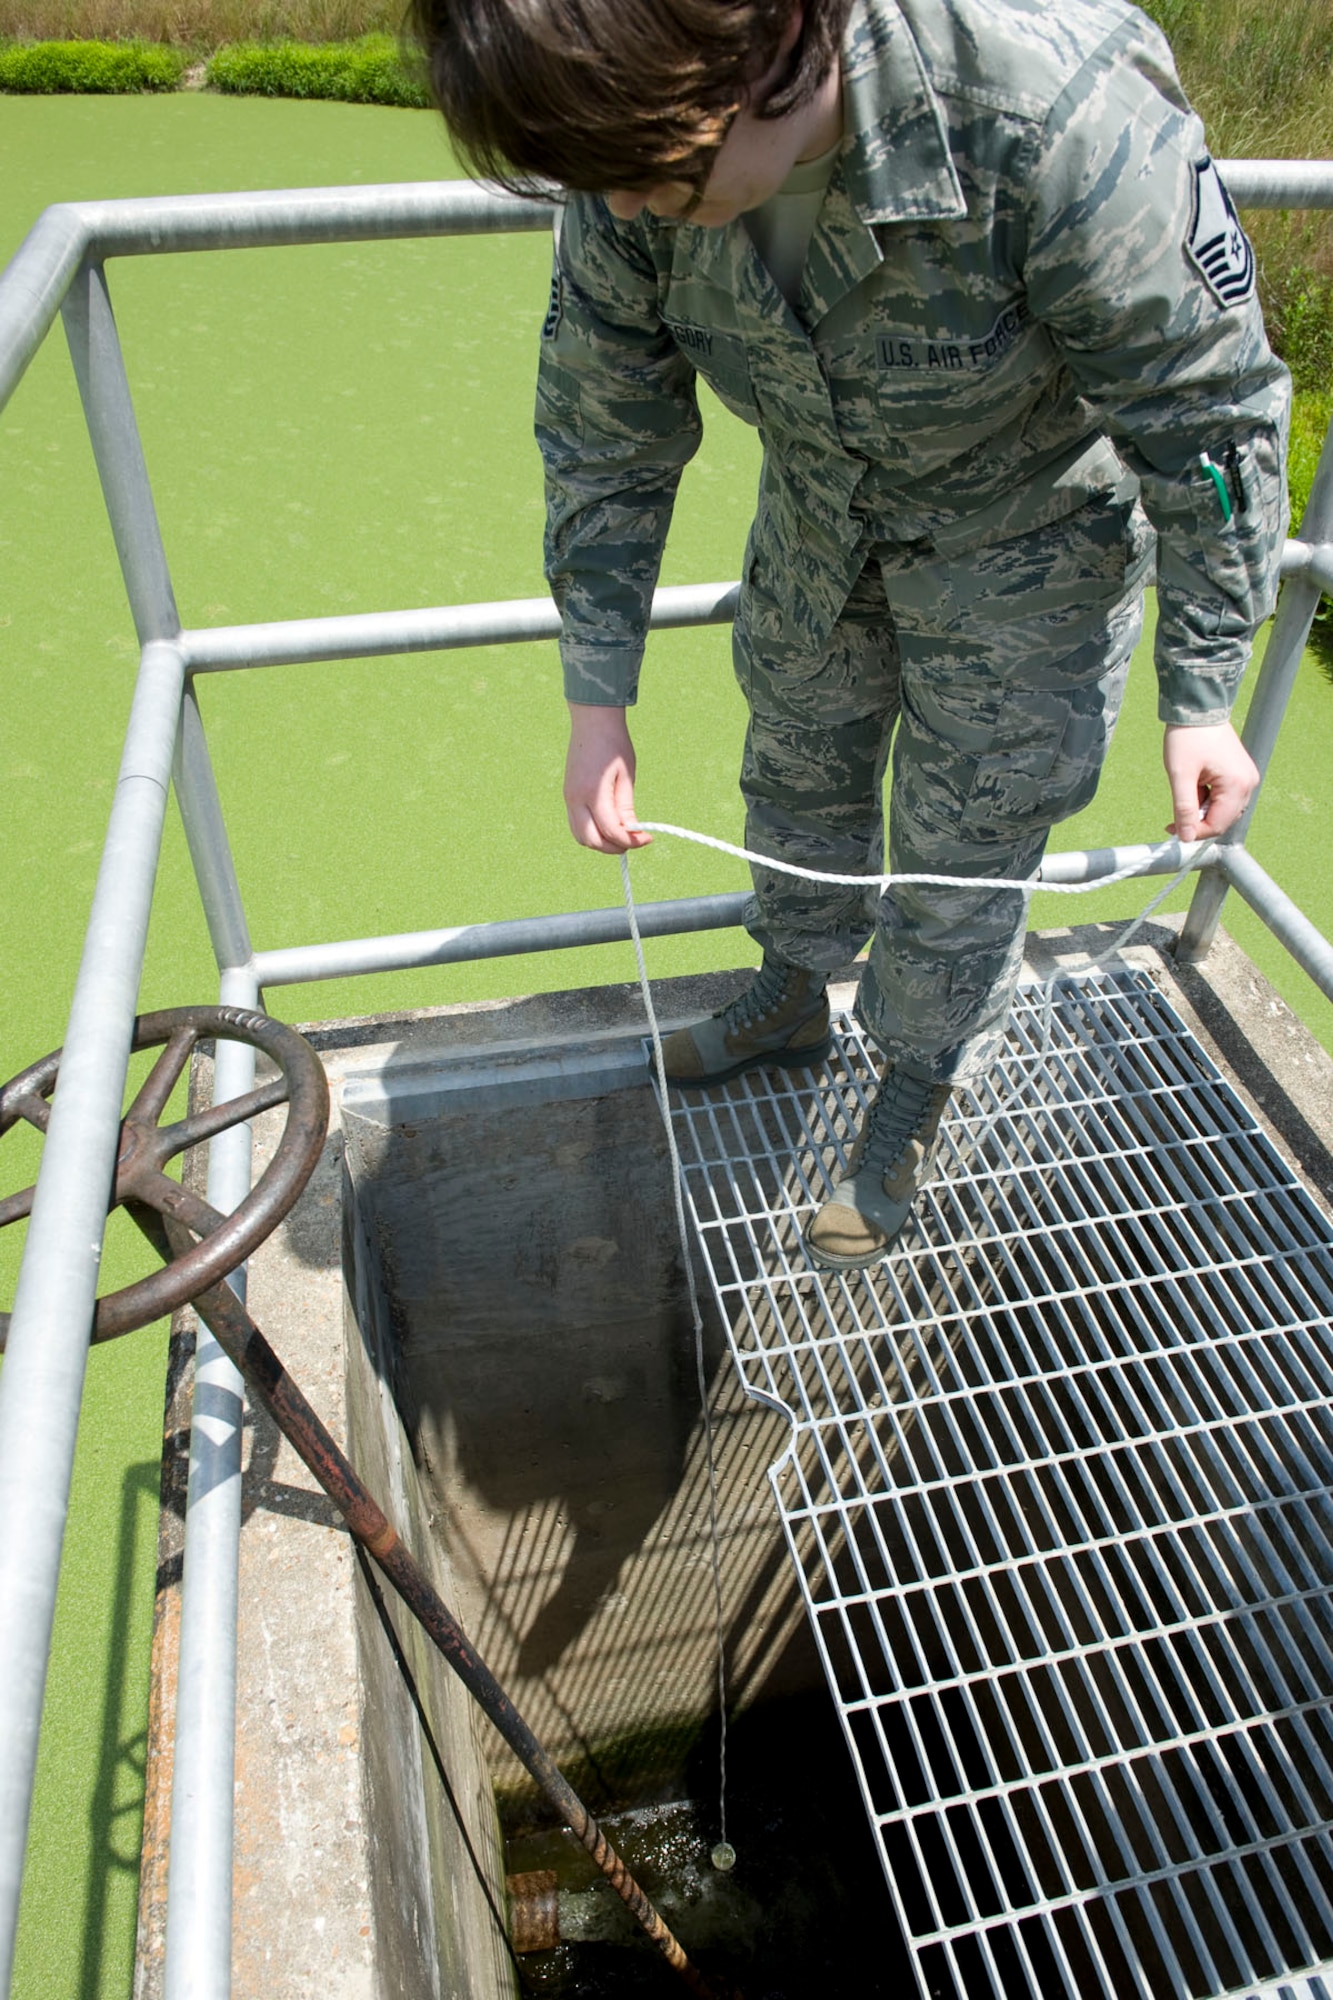 HAYNEVILLE, Ala. - Master Sgt. Tiffany Gregory, a public health technician with the 176th Medical Group, Alaska Air National Guard, collects a sample of water from the City of Hayneville?s waste-water treatment lagoon, May 8, 2011.  Gregory was in Alabama to help test the waste water for permit compliance and related treatment adjustments, and with drinking water for chlorine amount. She was also deploy with another seventy servicemembers from numerous military components and services in Hayneville for an Innovative Readiness Training (IRT) mission. The IRT program allows for real world training opportunities for military personnel while providing needed services to under-served communities in the United States. Alaska Air National Guard photo by Master Sgt. Shannon Oleson.